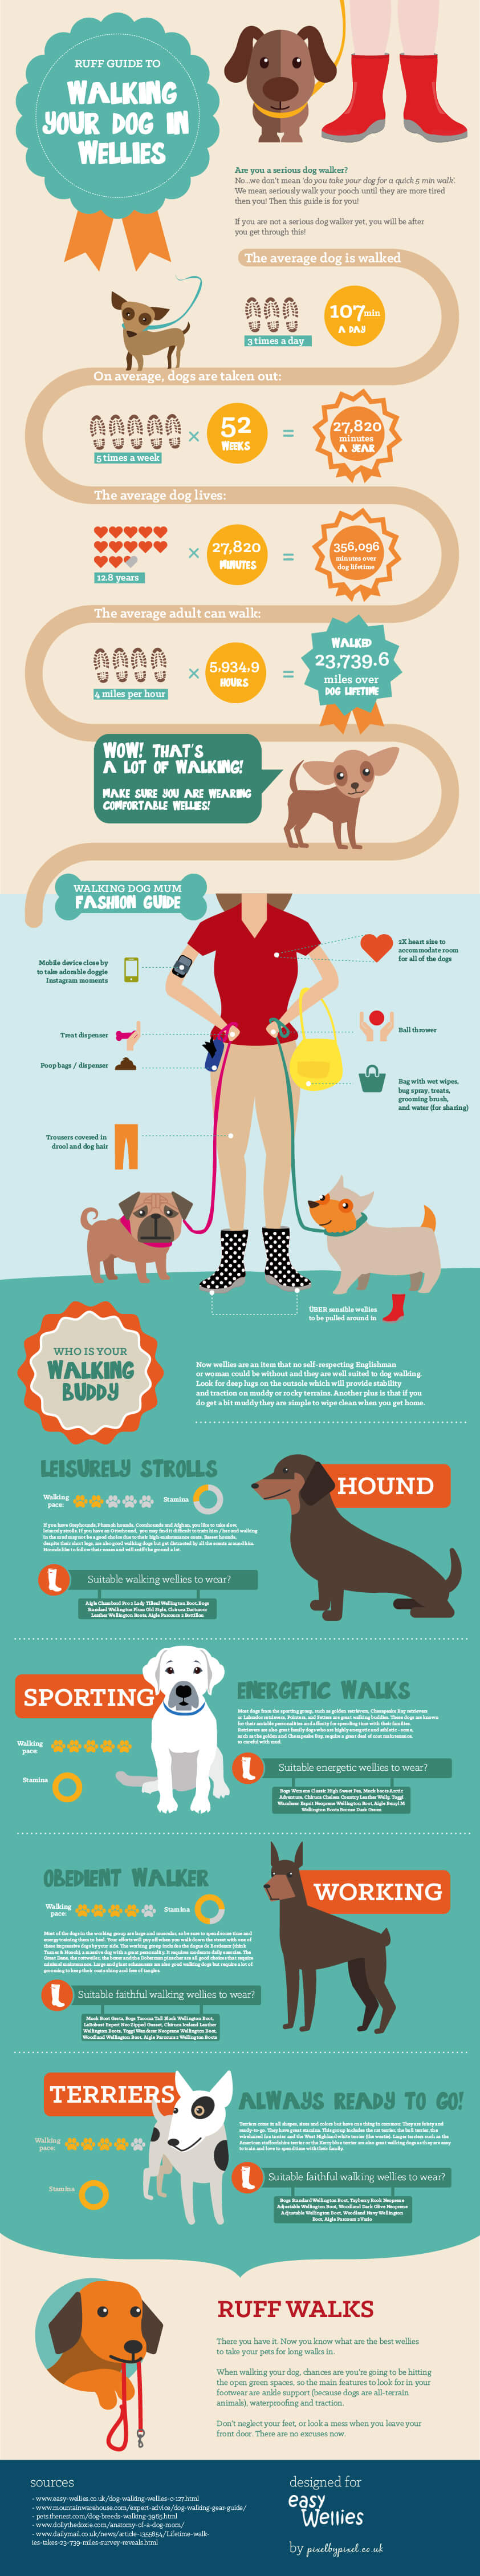 Ruff Guide to Walking Your Dog in Wellies